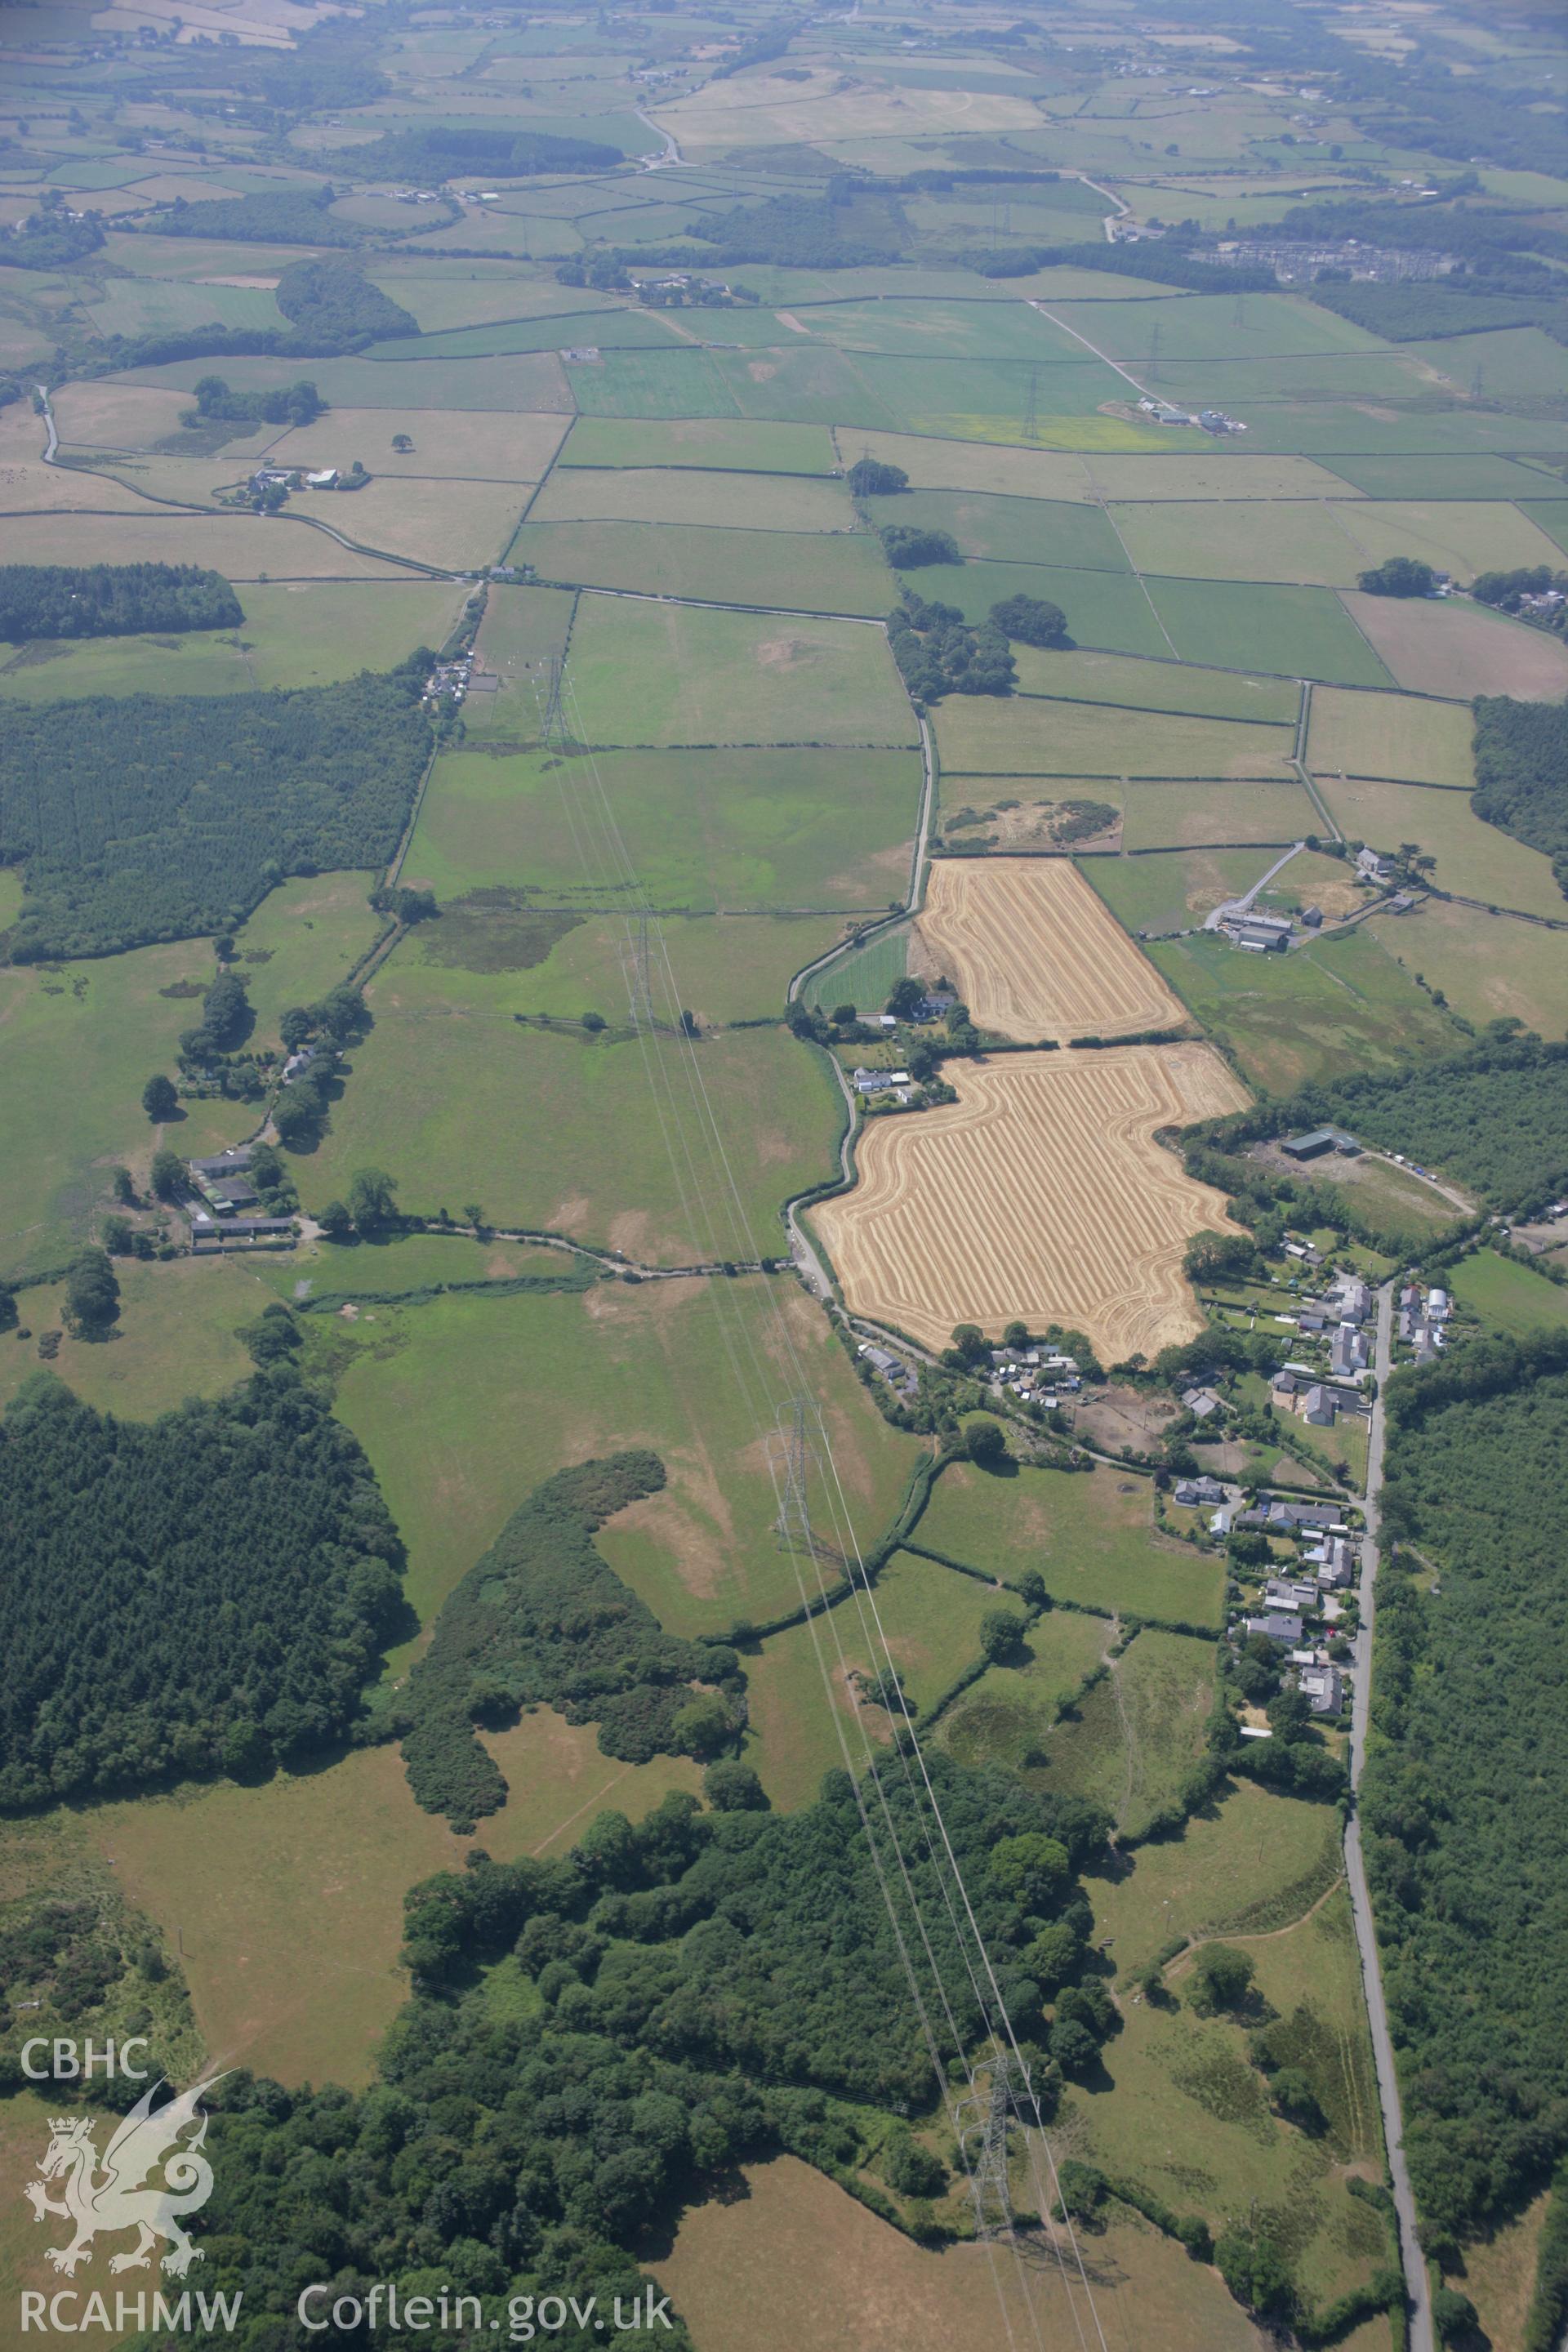 RCAHMW colour oblique aerial photograph of St George's Church and nearby parchmarks at Waen Wen. Taken on 18 July 2006 by Toby Driver